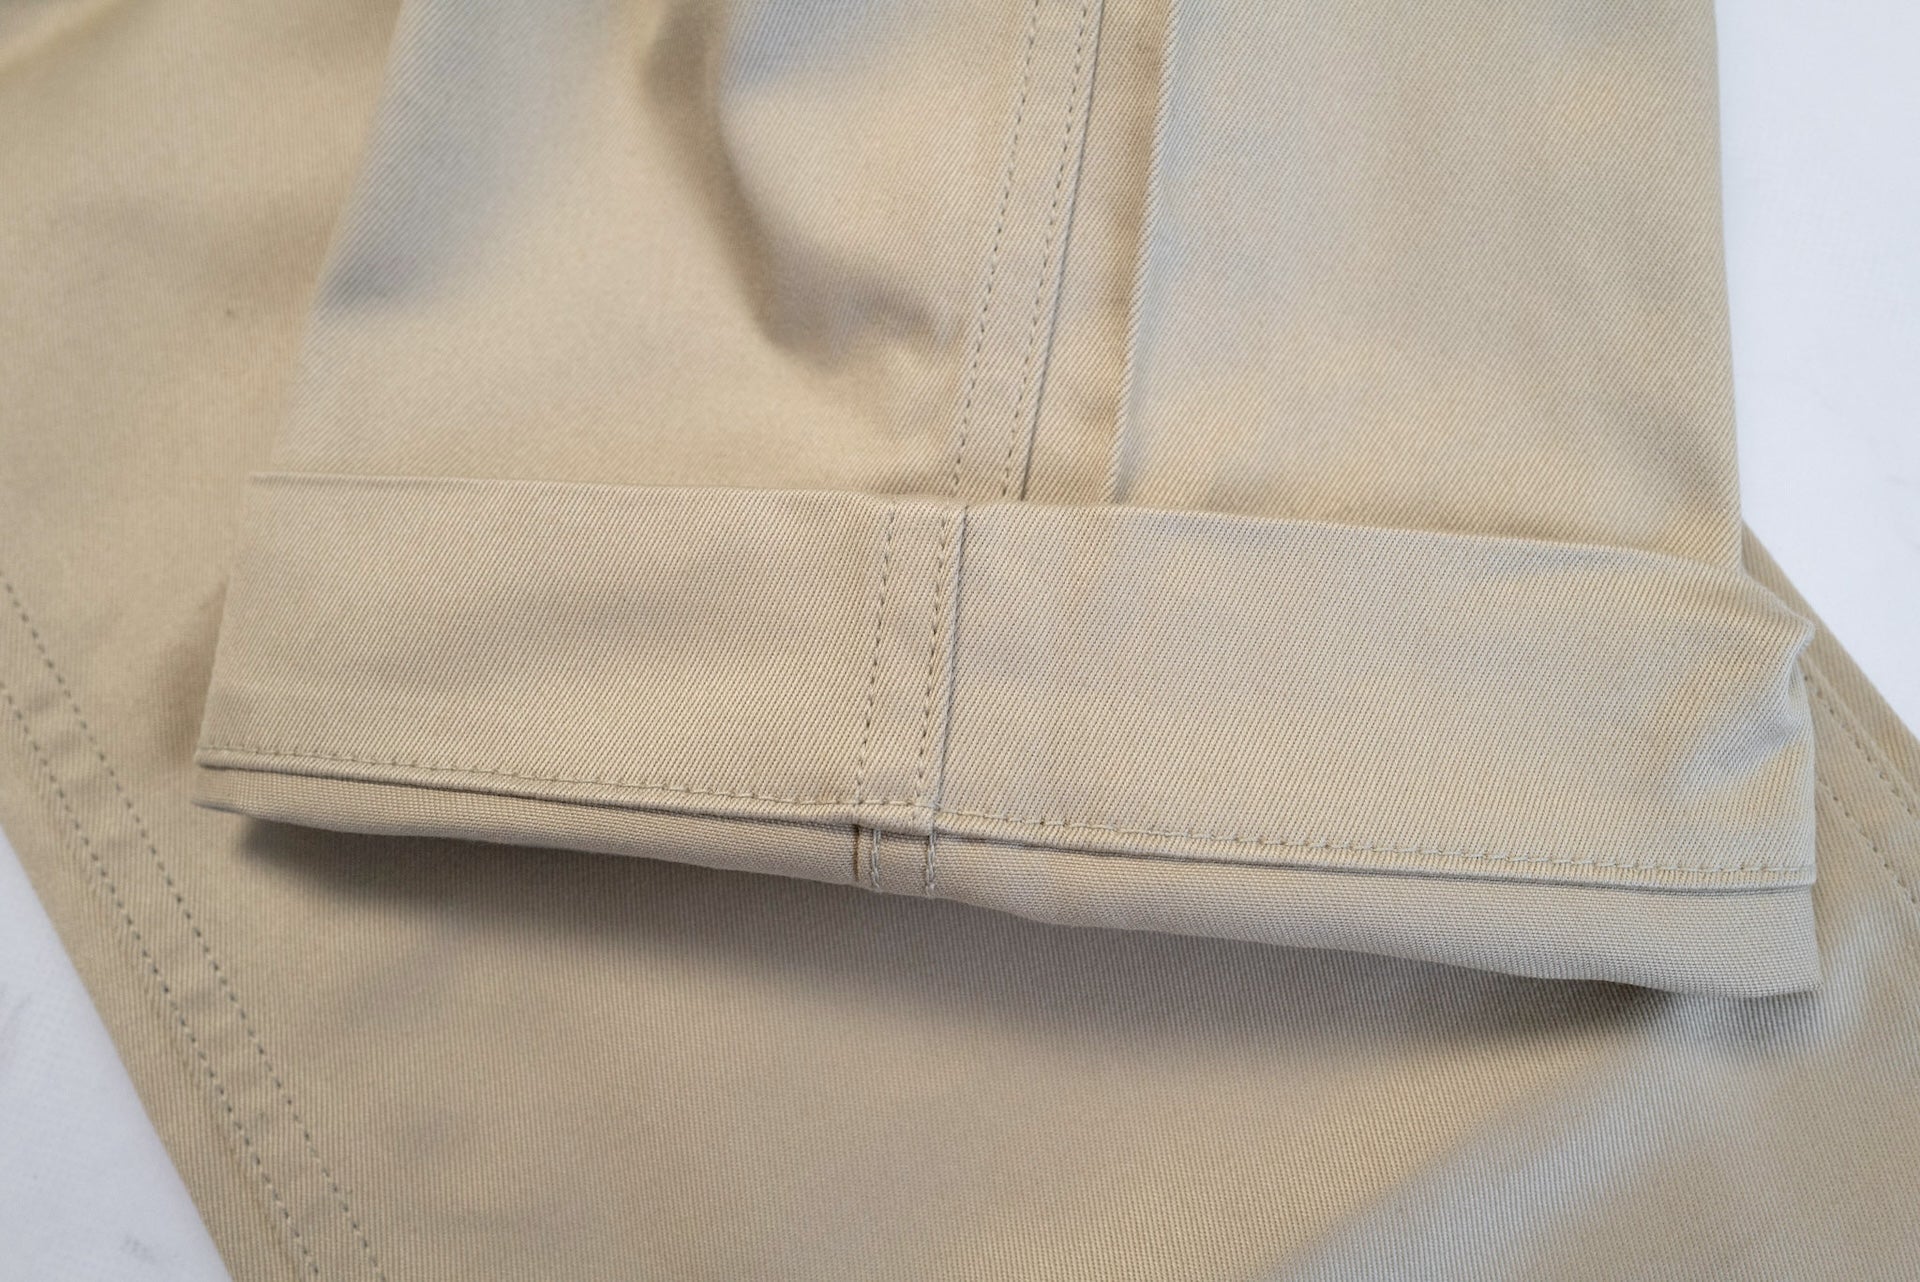 Warehouse Co 12oz Selvage Weapon Twill Chinos (Beige)